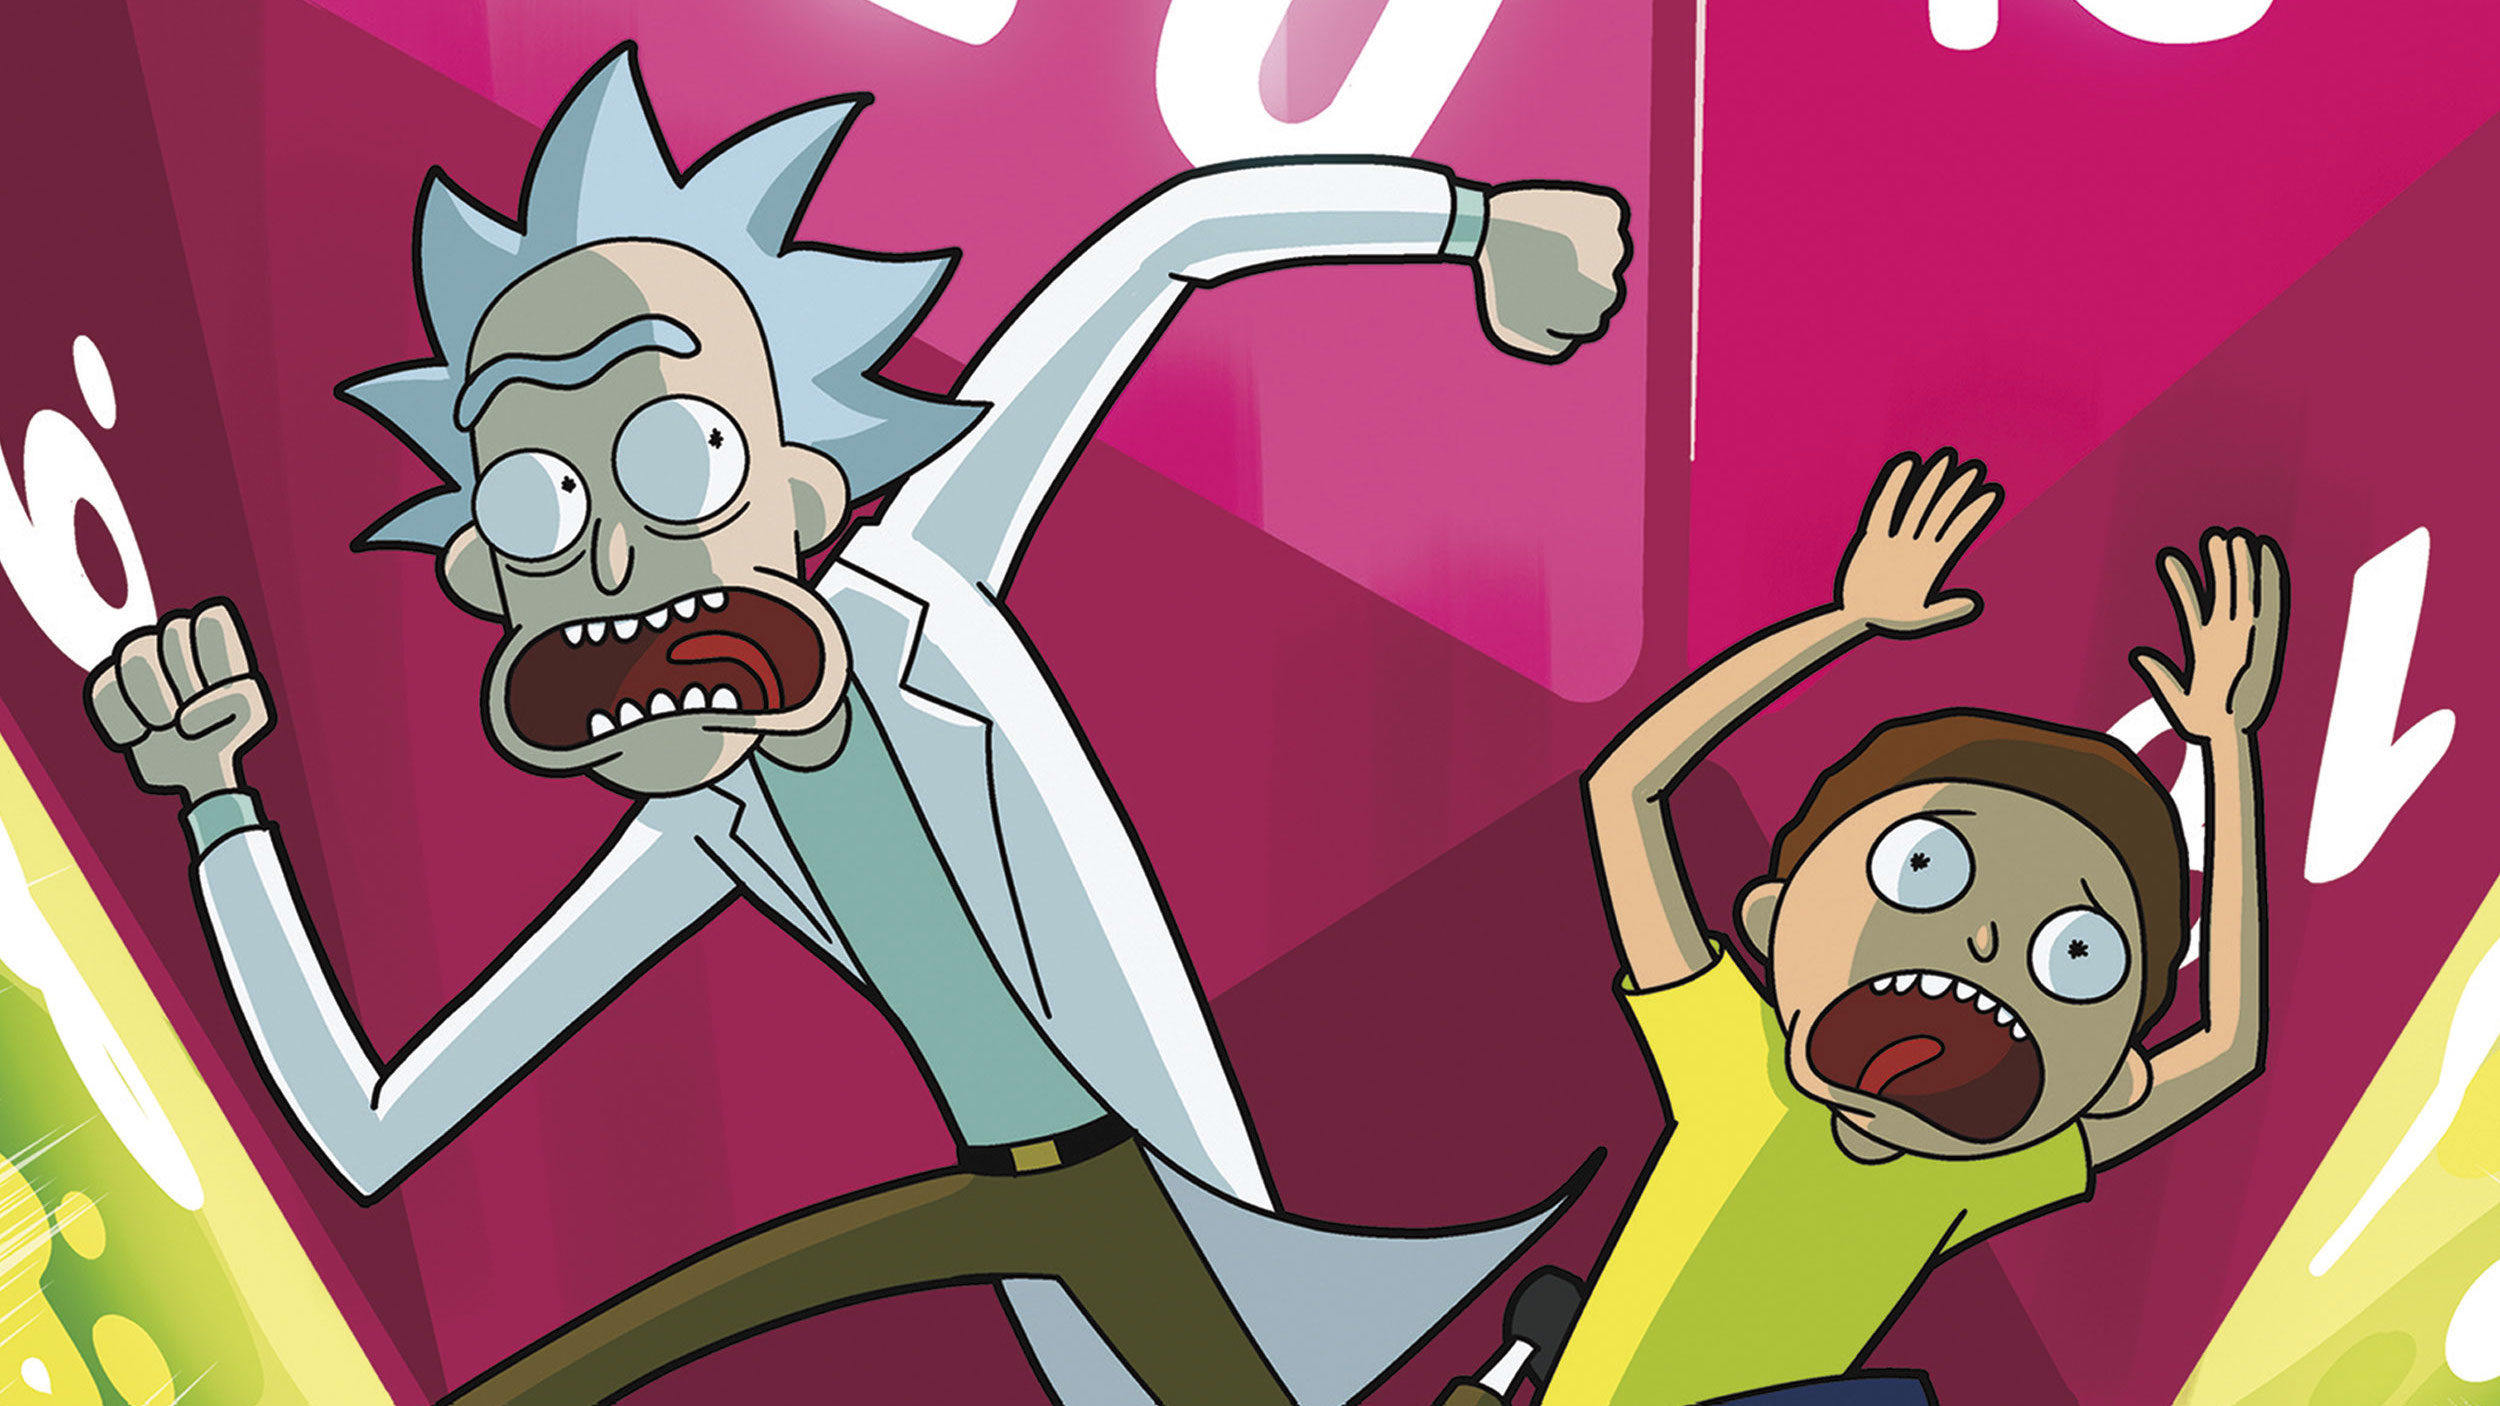 Rick and Morty Season 4 Episode 1 Release Date